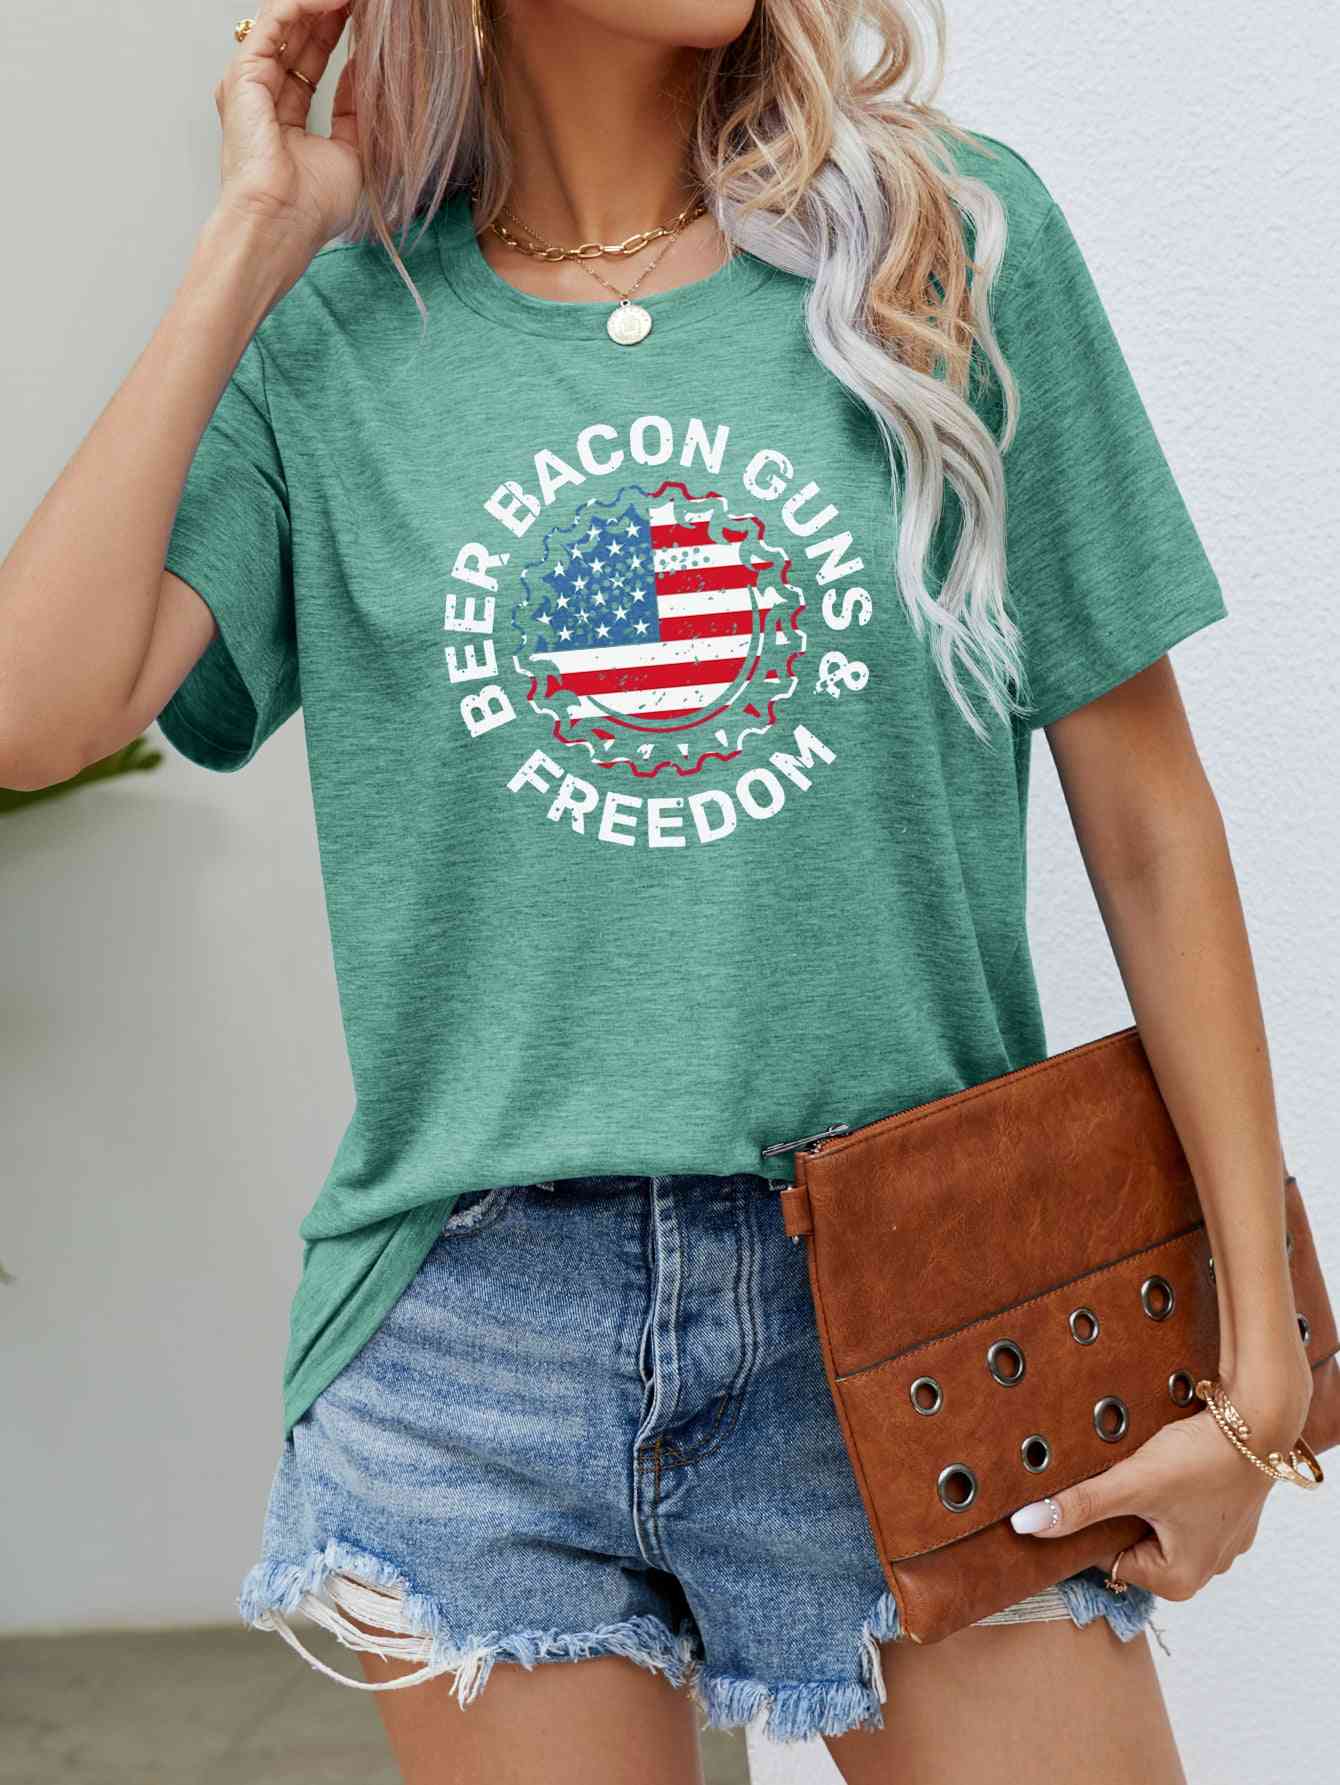 BEER BACON GUNS & FREEDOM US Flag Graphic Tee Gum Leaf S 